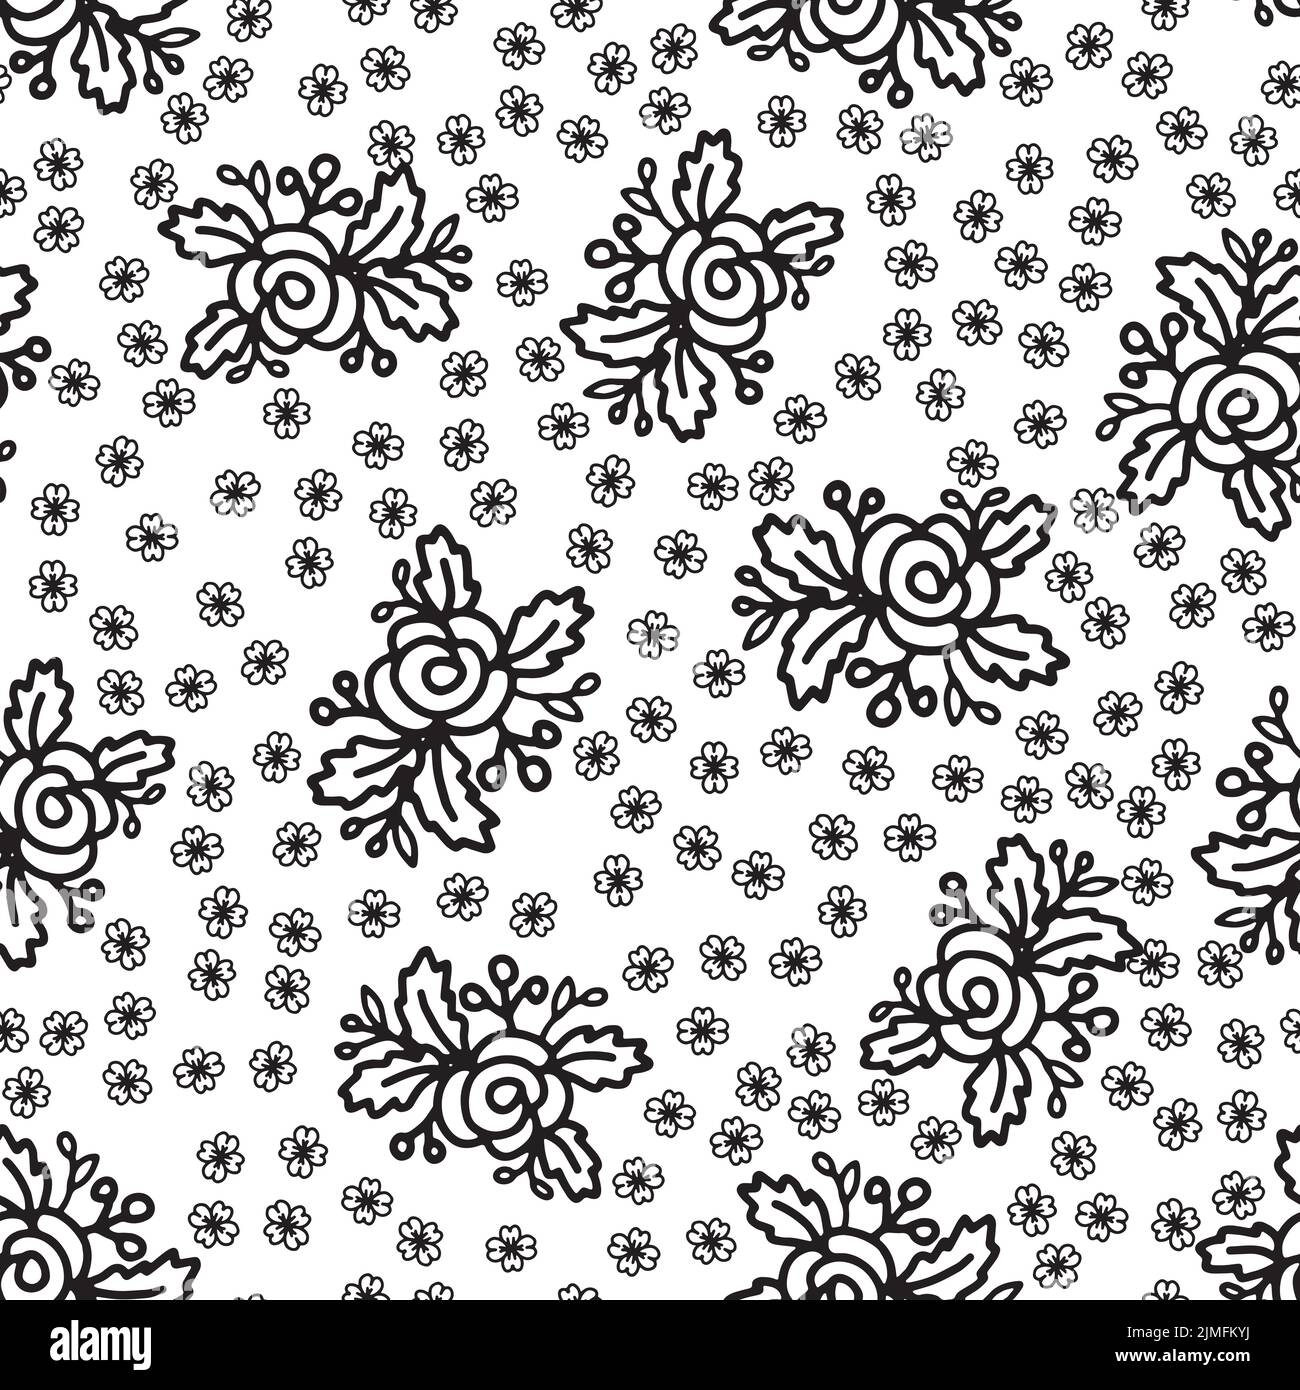 Floral black and white seamless pattern for textile or design background with hand drawn rose flower Stock Vector